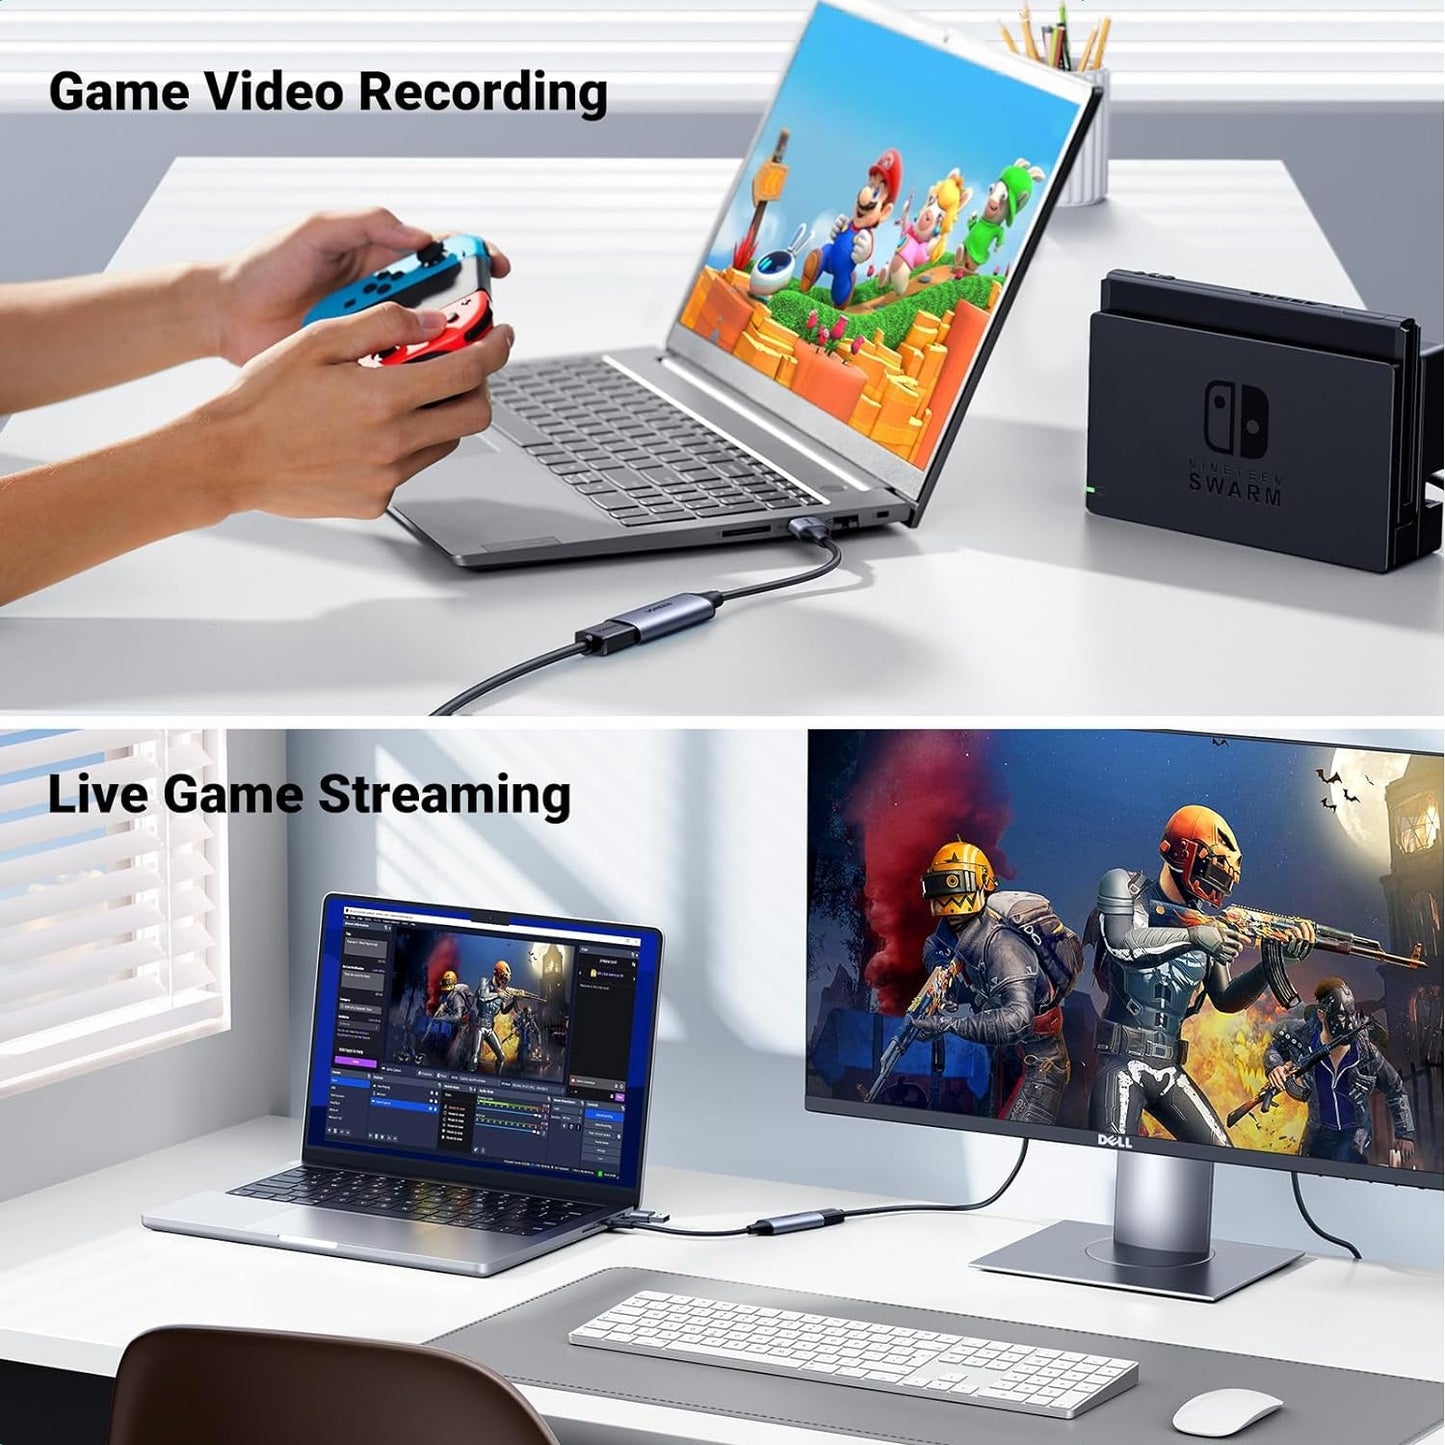 UGREEN Full HD 1080p USB A / USB C Male to 4K/60Hz HDMI Female Video Capture Card with 480Mbps Transfer Speed for Game Consoles, Smartphones, Cameras, Tablet, Camera, Laptop, PC, Computer with Windows 8.1/10/macOS/Linux/Android 5.0 | 40189